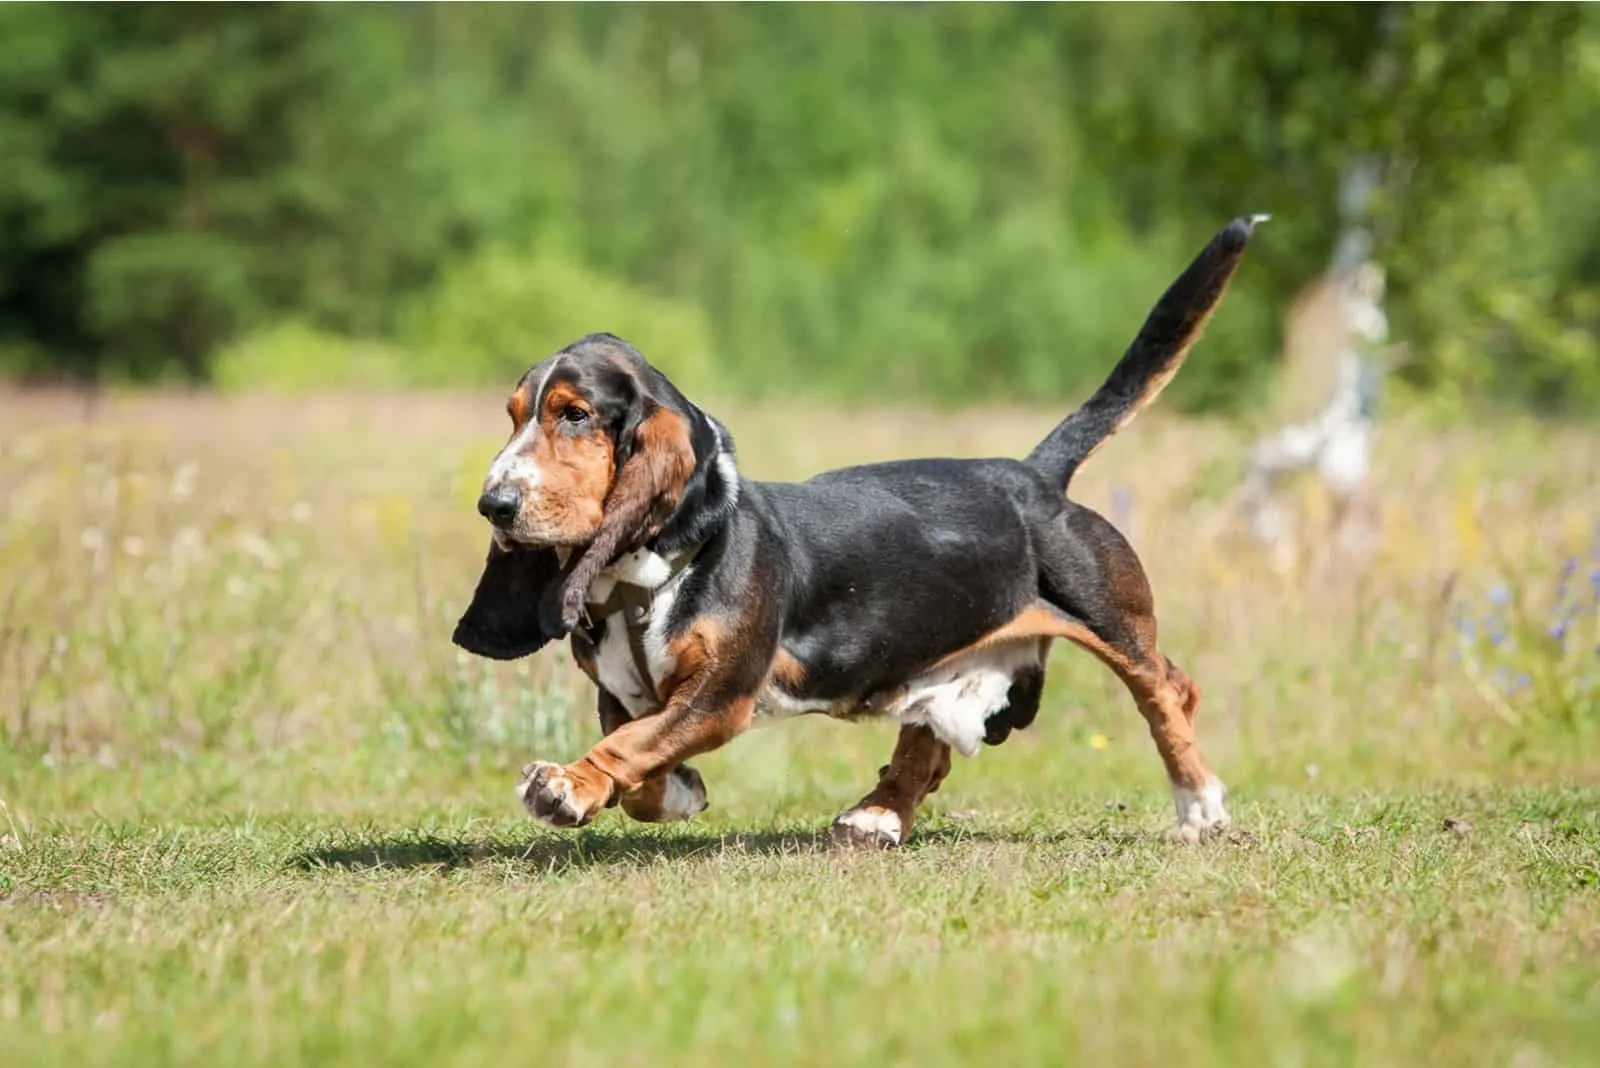 the adorable basset hound runs across the meadow